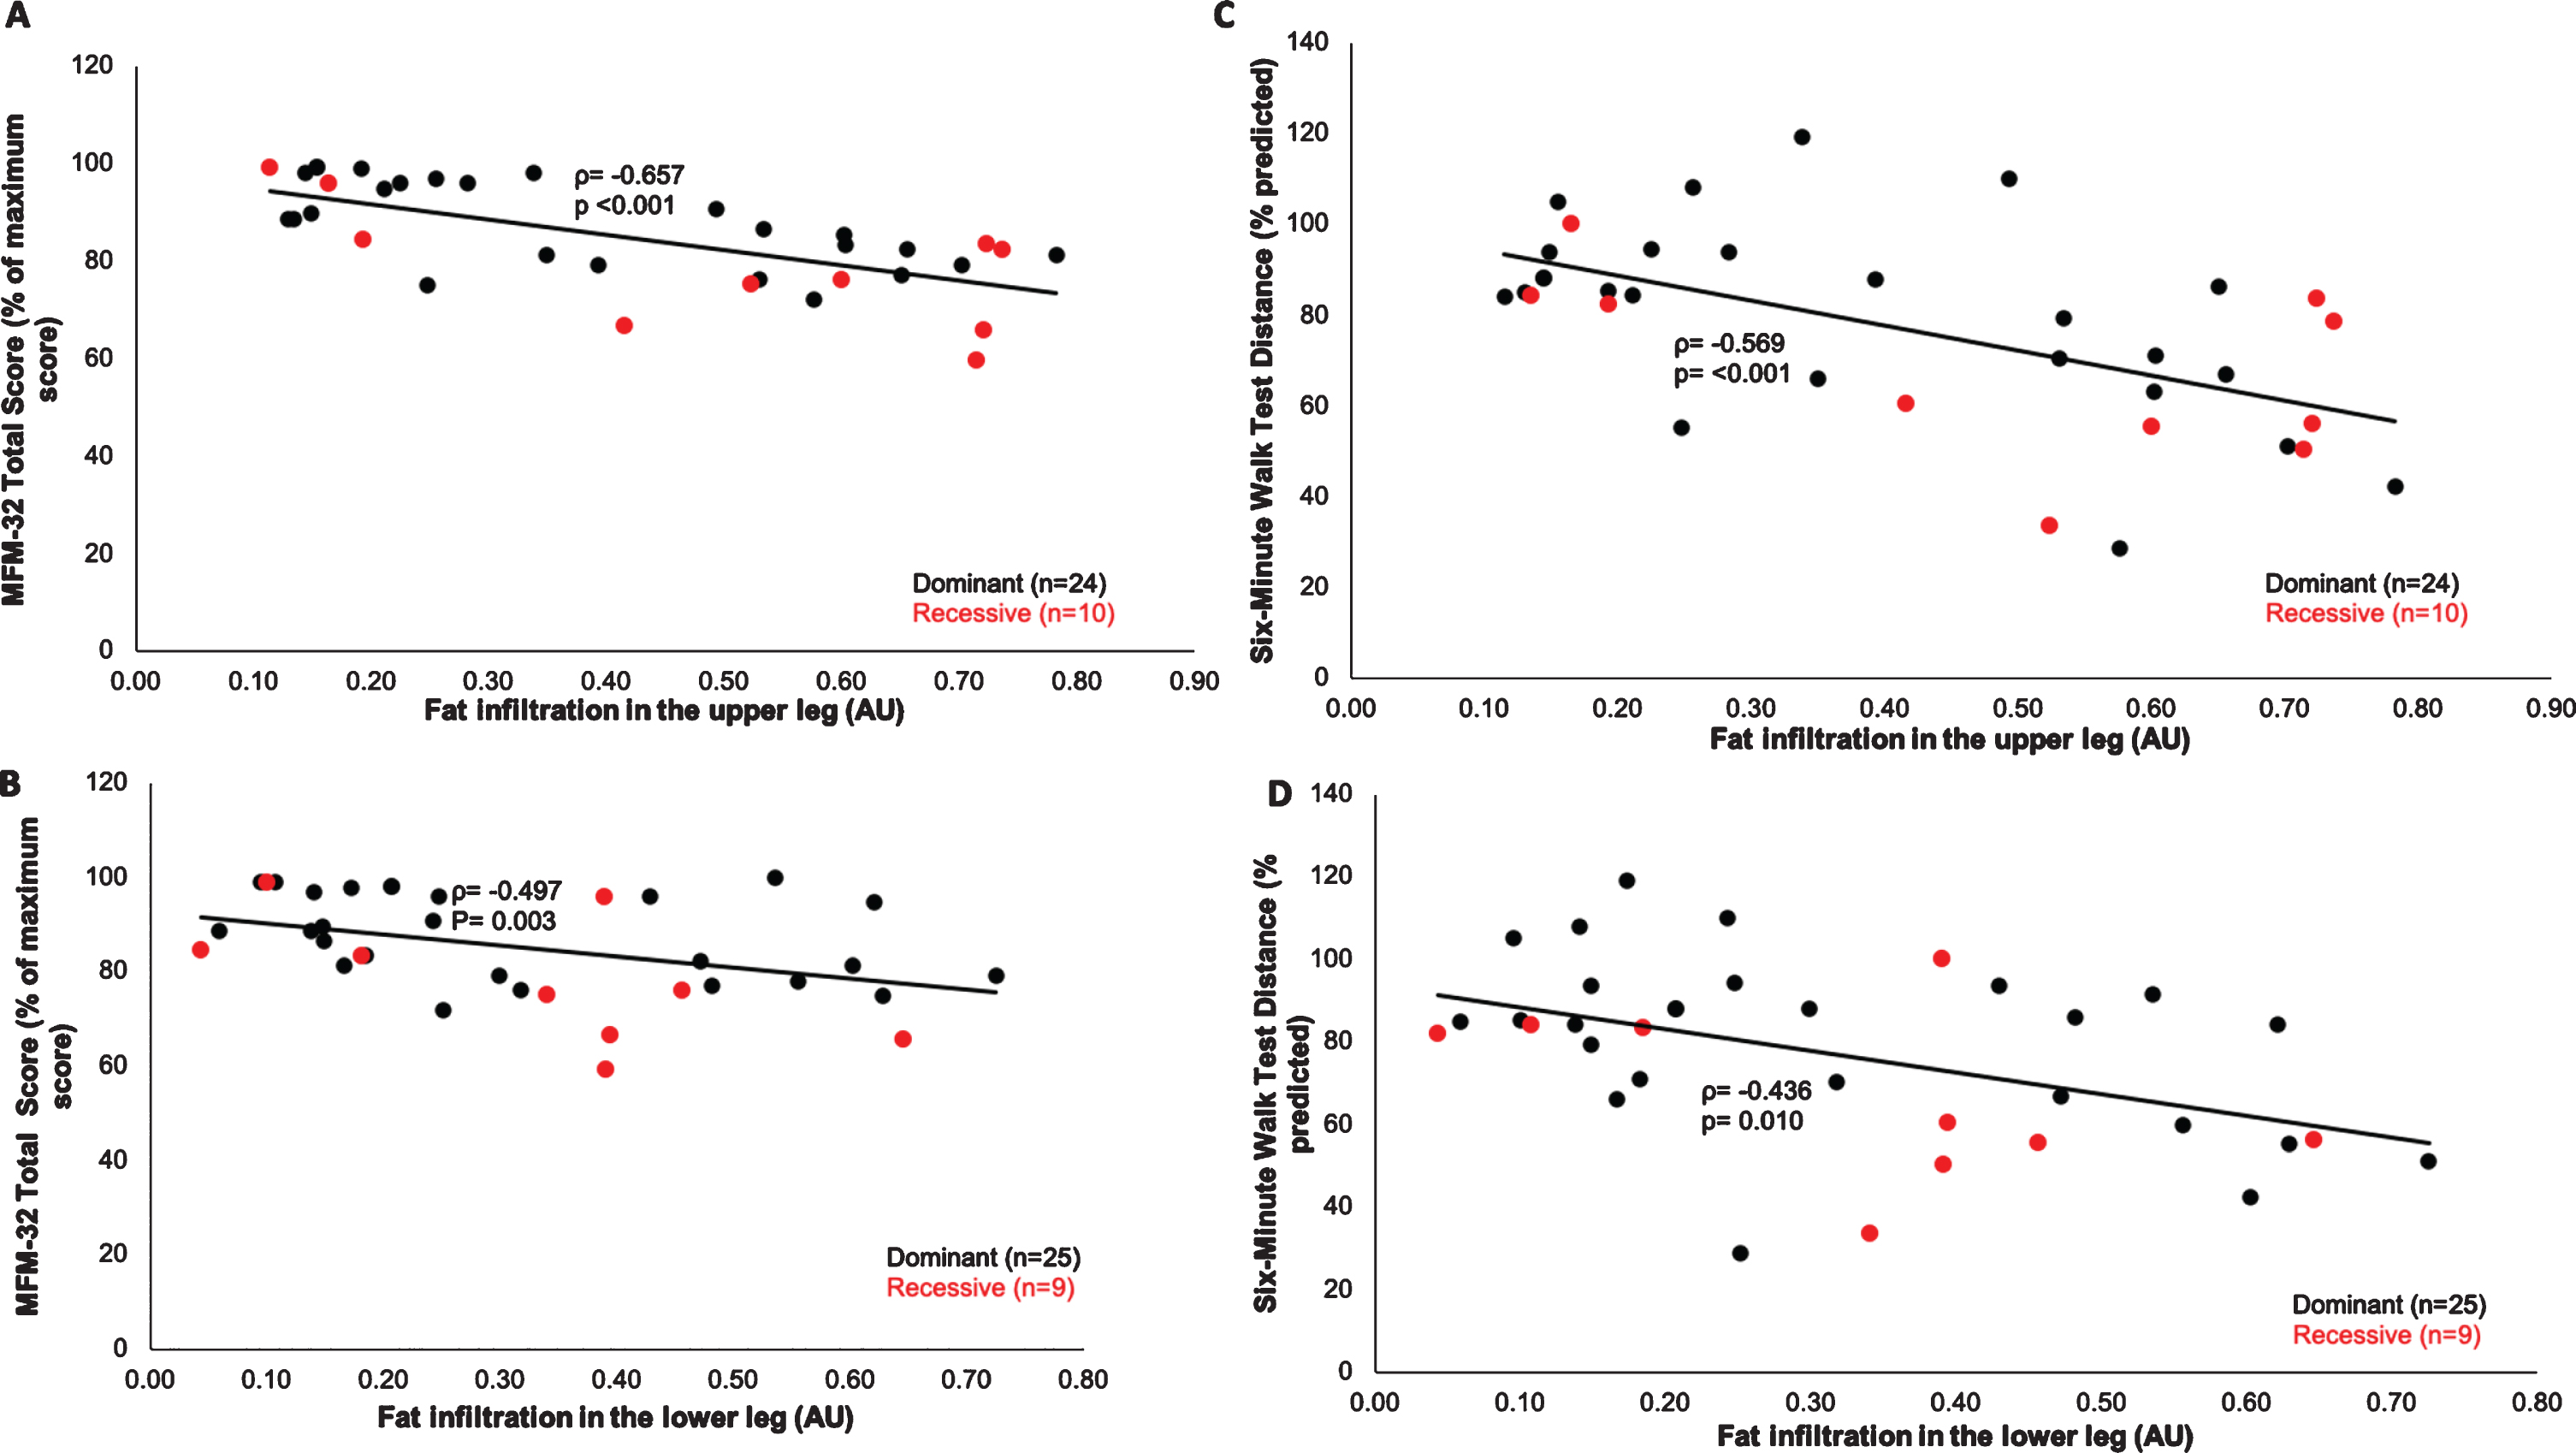 Bivariate correlations between muscle fatty infiltration and motor function in RYR1-RM. (A-B) Muscle fatty infiltration was inversely correlated with MFM-32 total score (upper leg: Spearman’s rho (ρ) = –0.657, p < 0.001; lower leg: ρ= –0.497, p = 0.003) and (C-D) 6MWT distance (upper leg: ρ= –0.569, p < 0.001; lower leg: ρ= –0.436, p = 0.010).